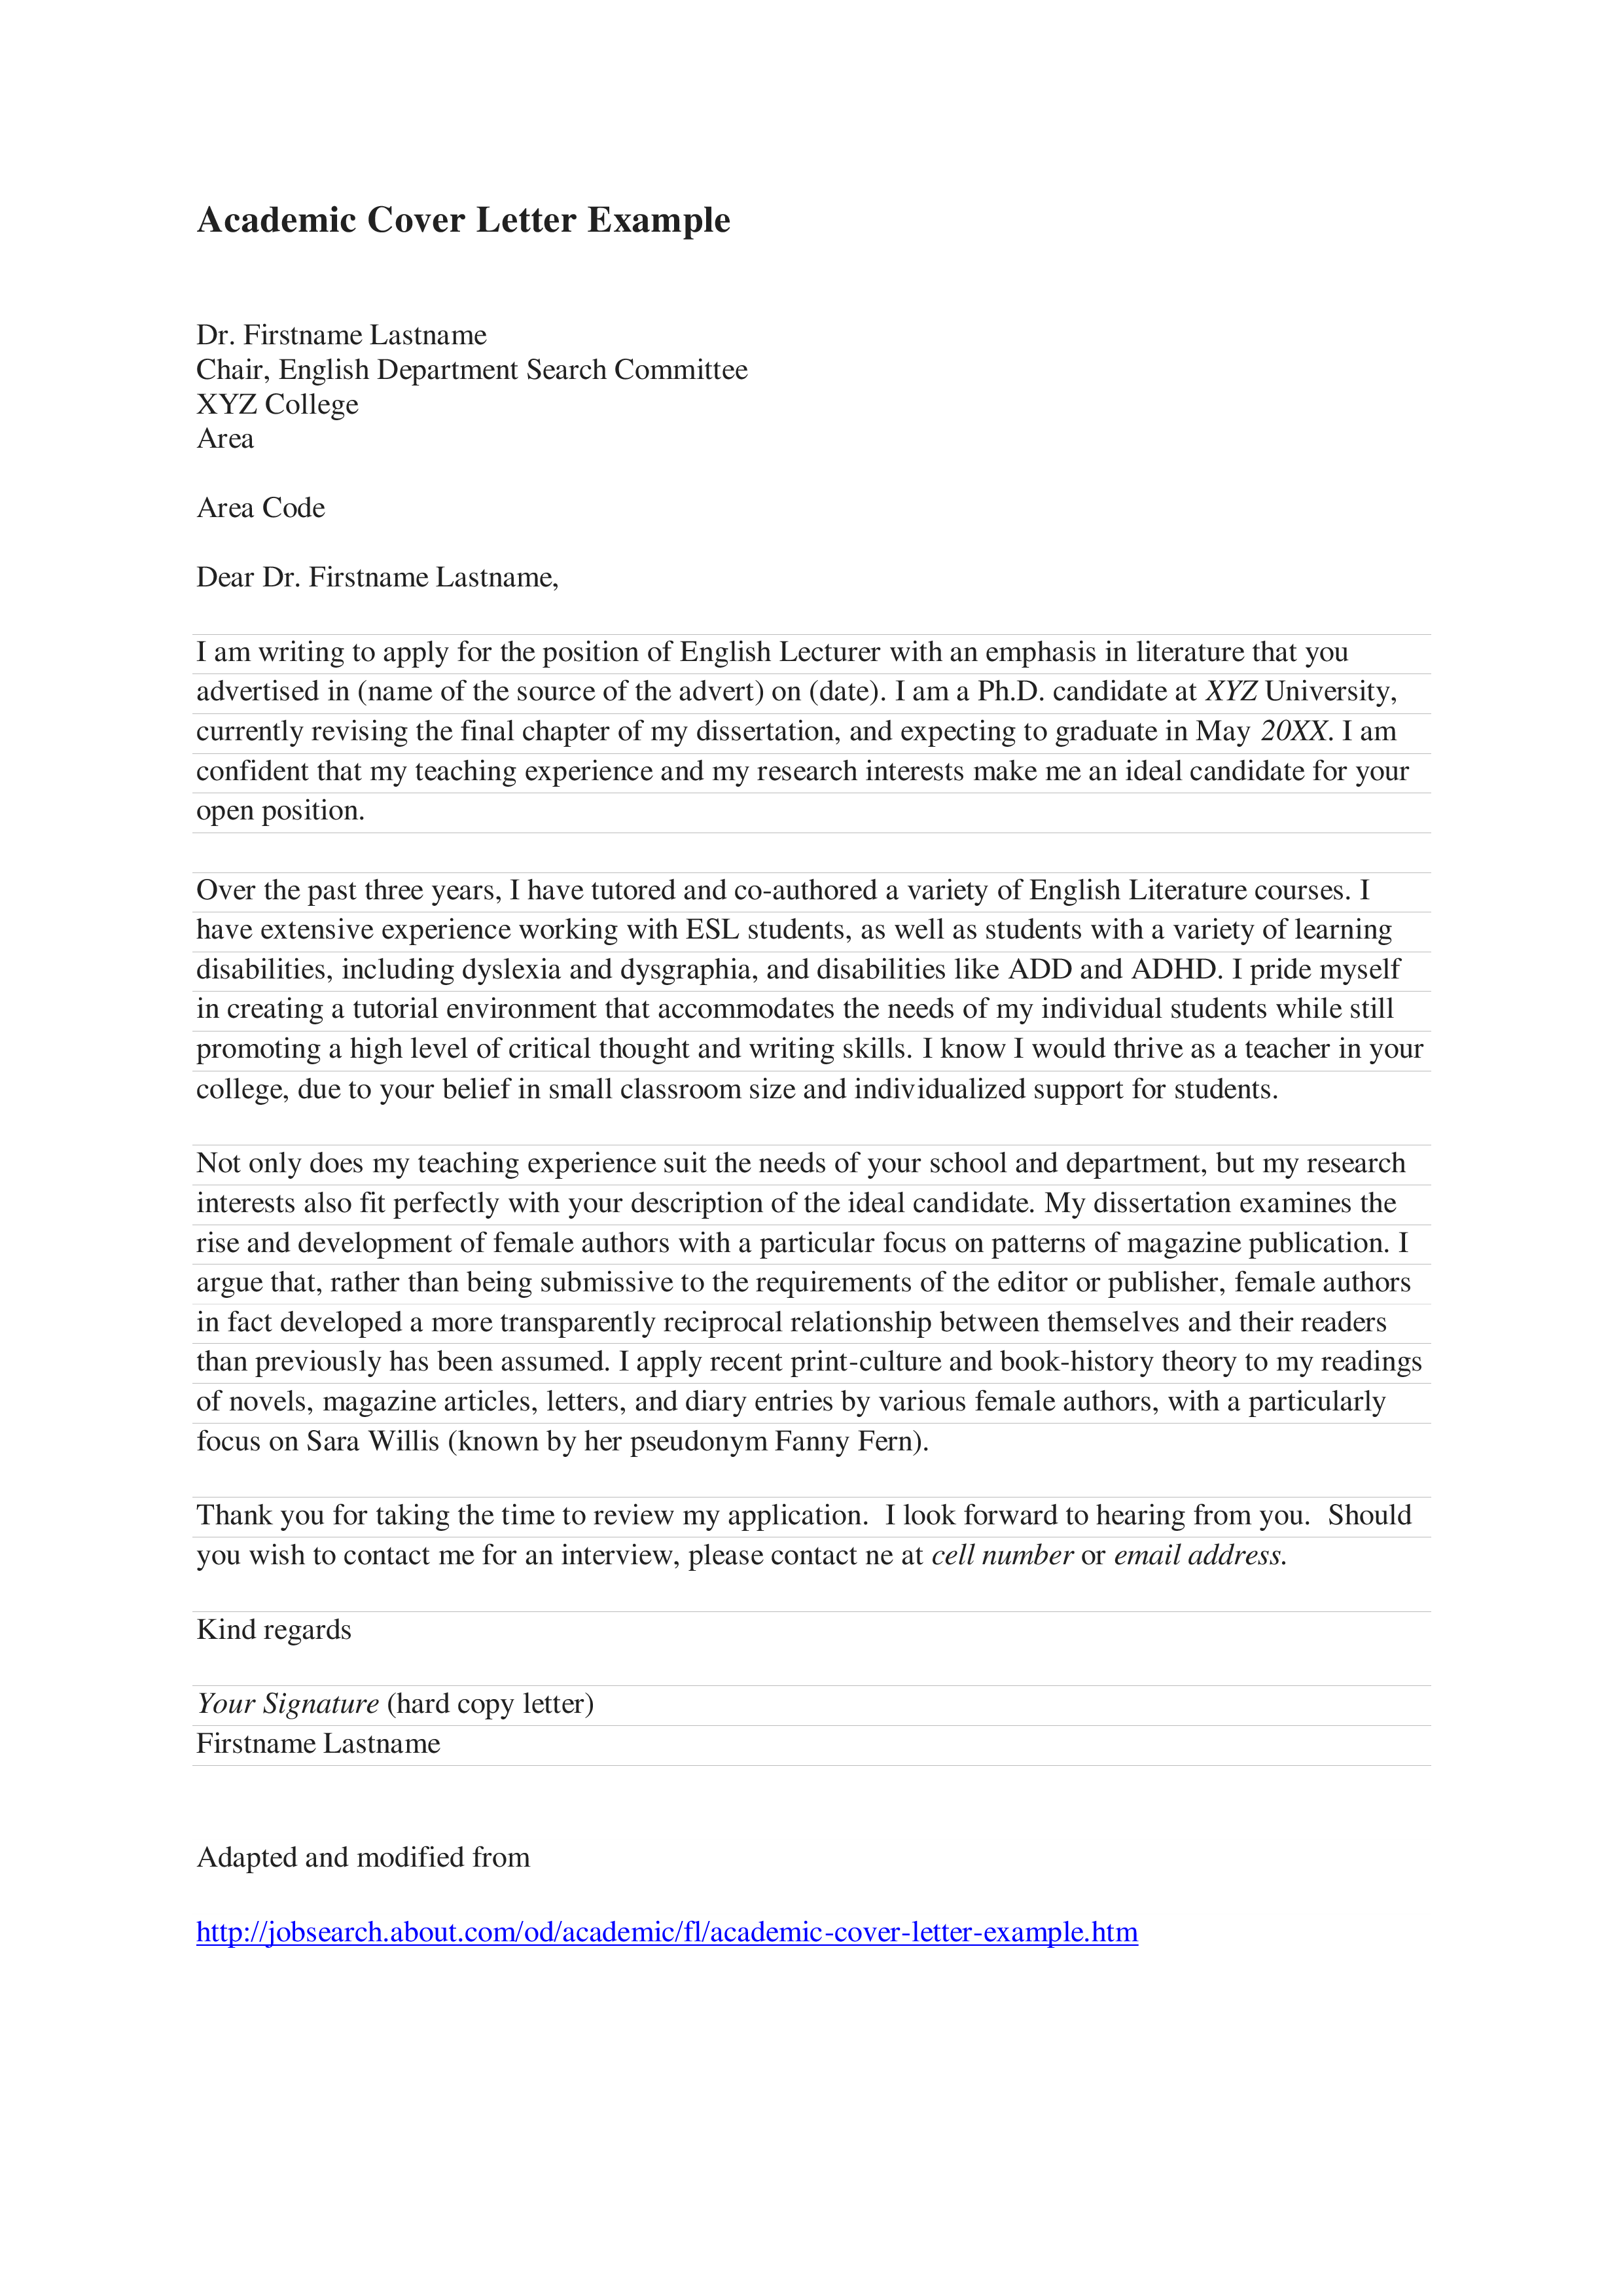 academic cover letter font size